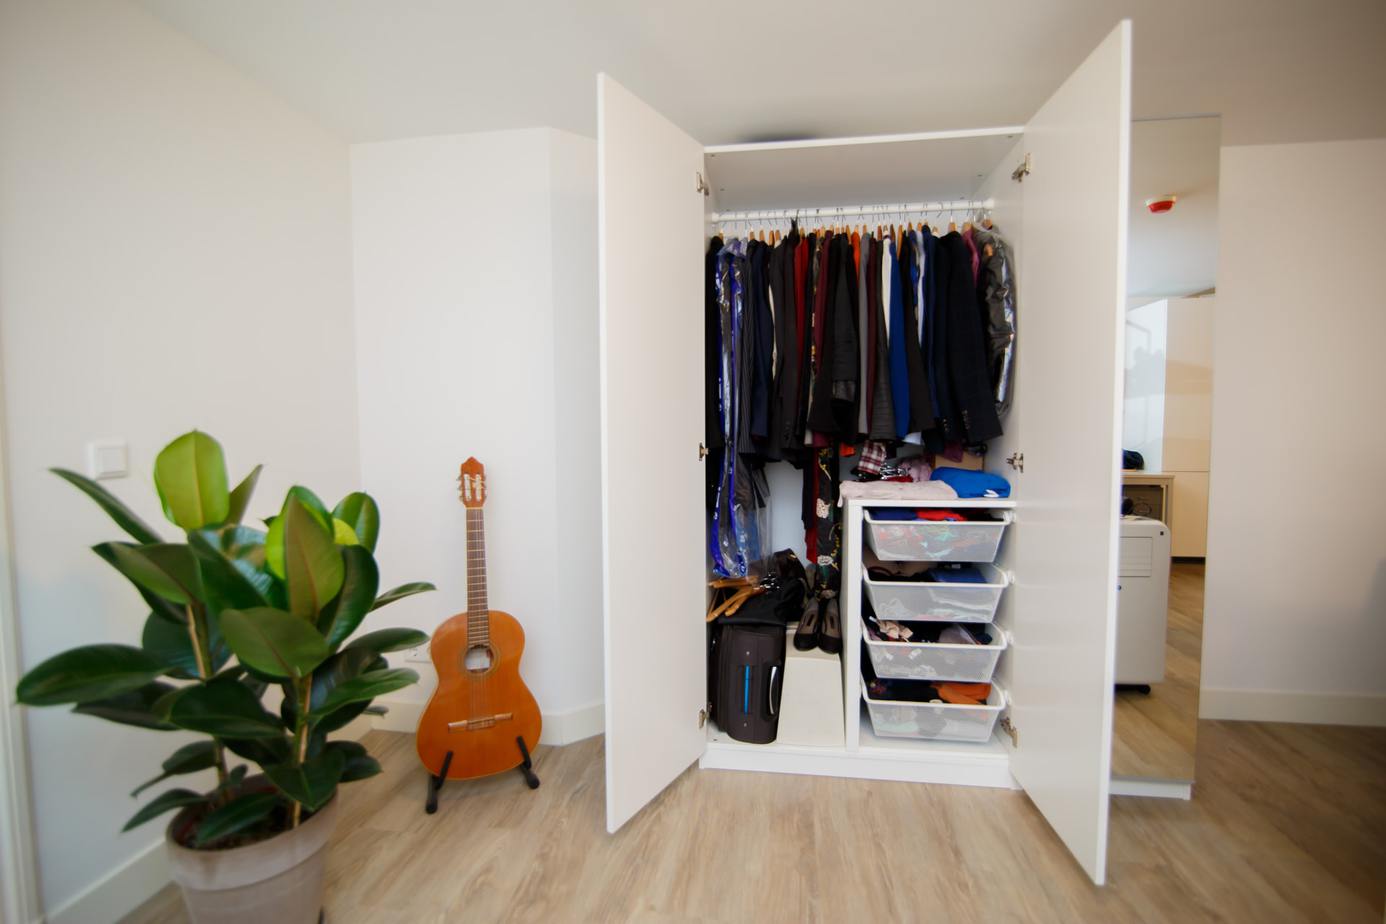 Natural ways to have a smelly closet